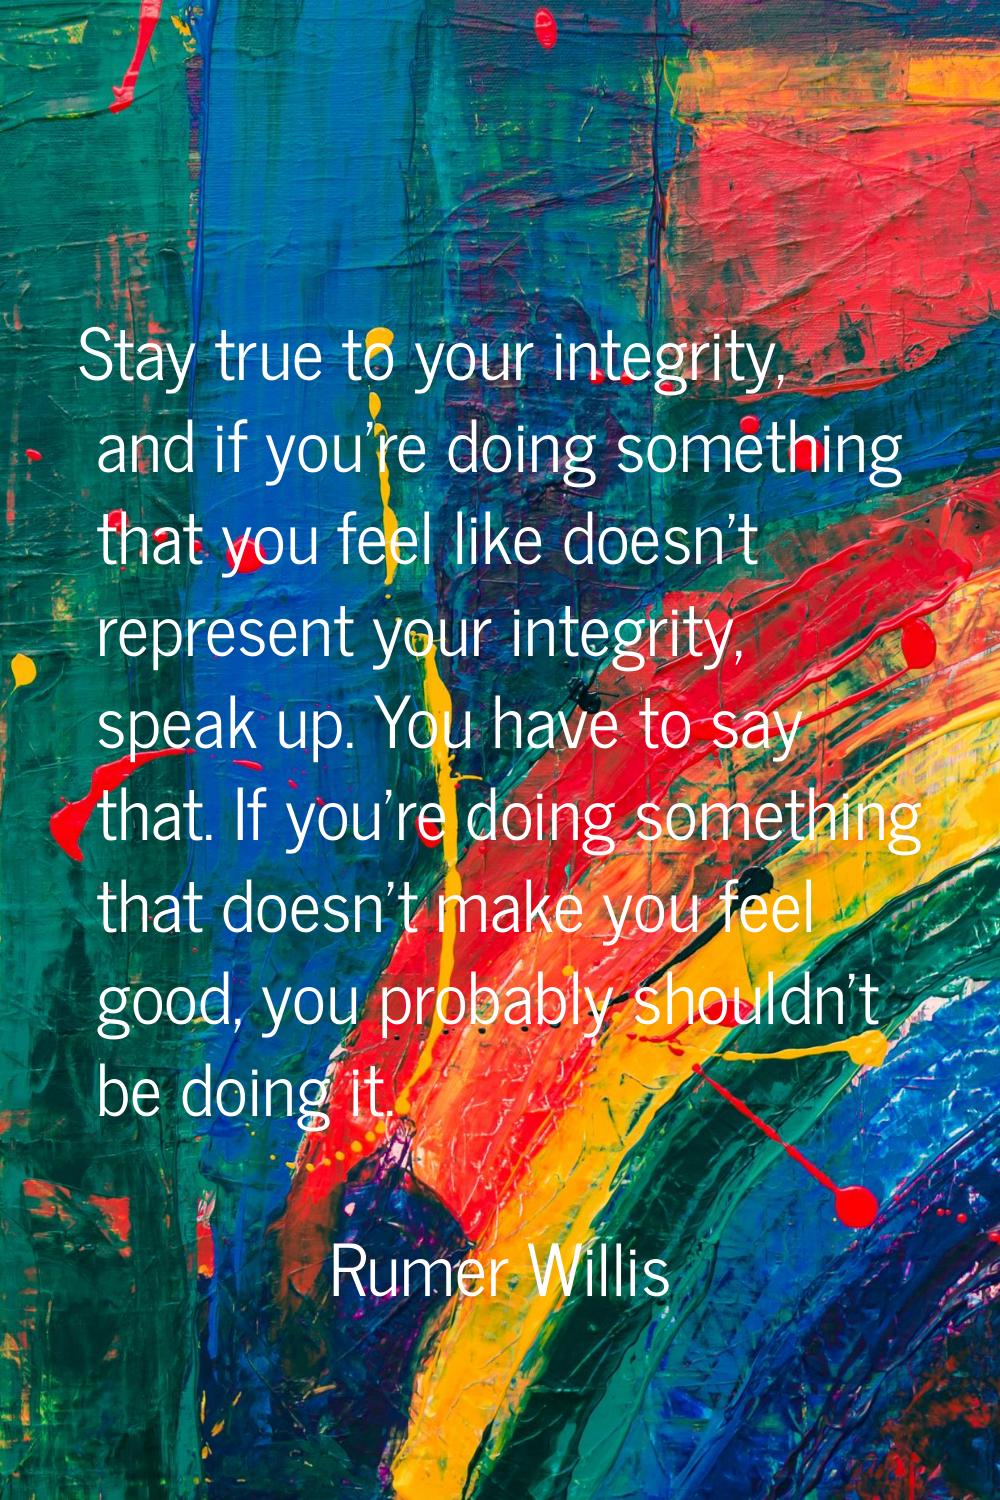 Stay true to your integrity, and if you're doing something that you feel like doesn't represent you